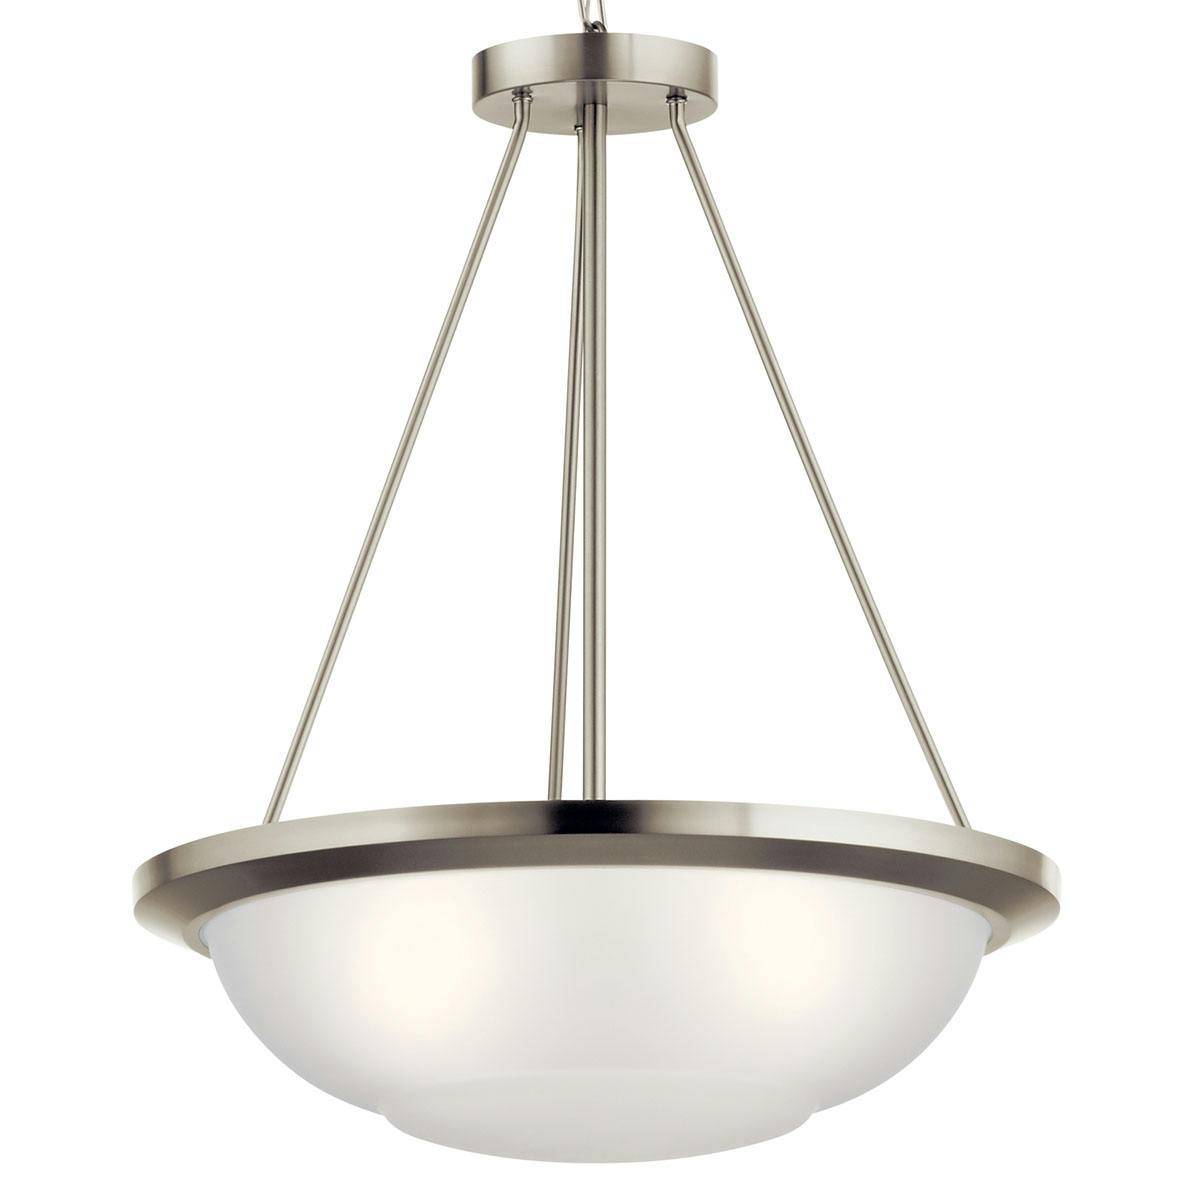 Close up view of the Ritson 3 Light Inverted Pendant Nickel on a white background